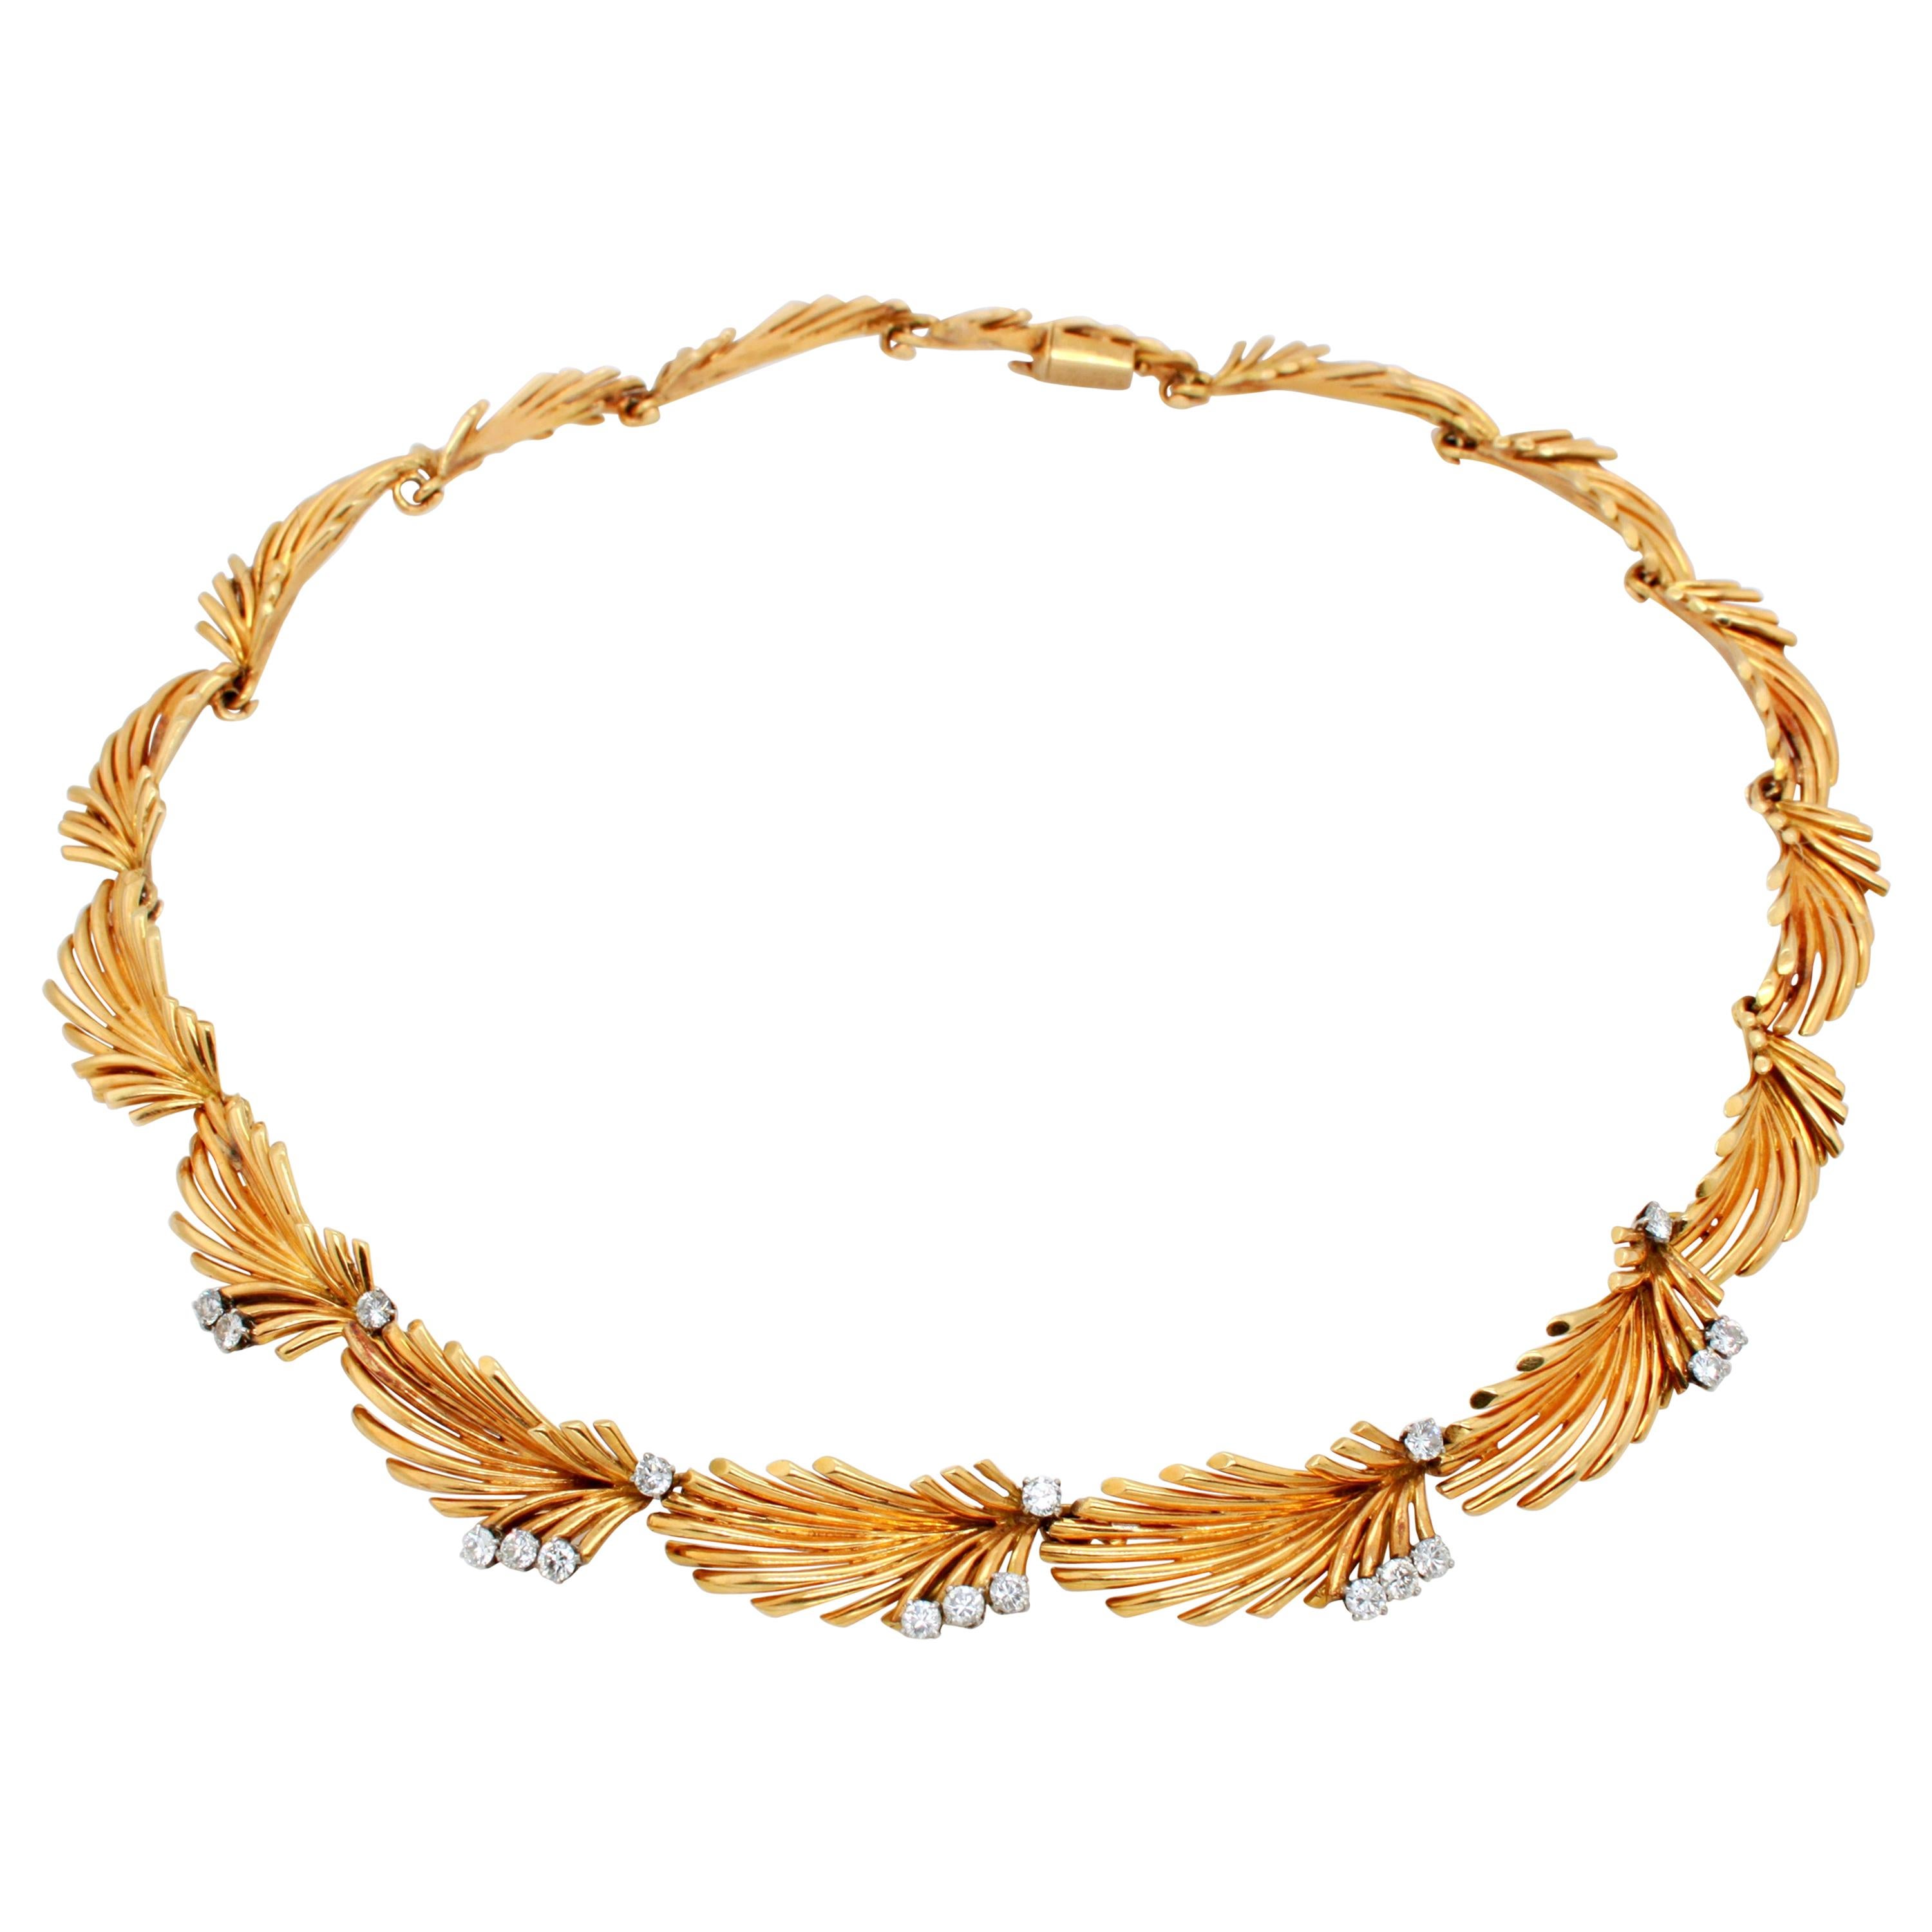 Van Cleef & Arpels Palm Leaf Gold and Diamond Necklace, circa 1950s